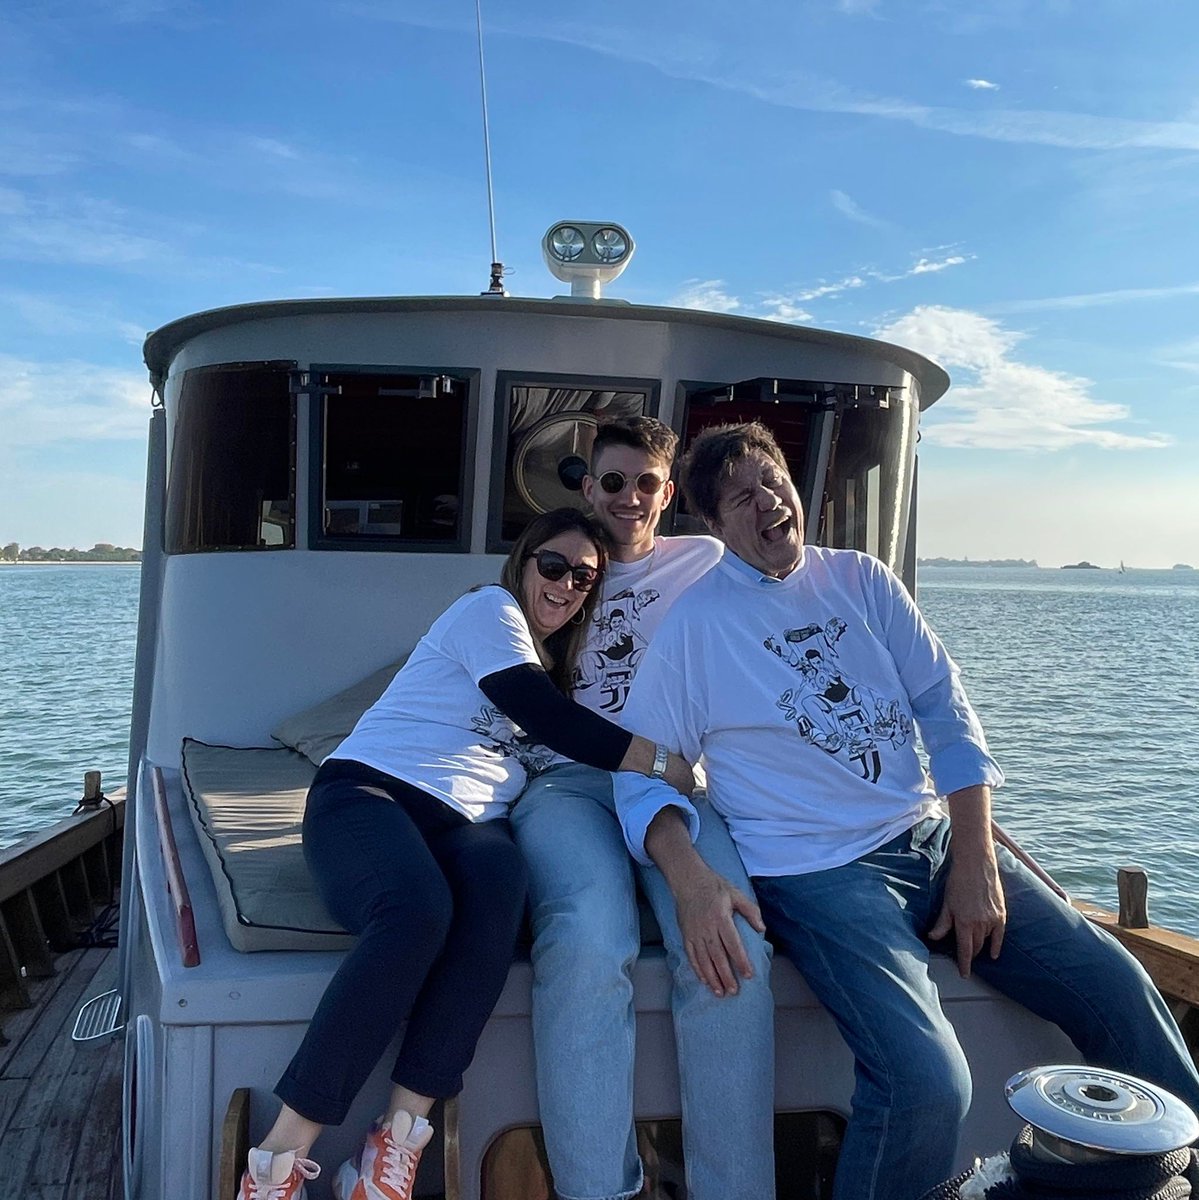 Happy Mother's Day to all the amazing moms! 🌷 
A special greeting to Lella, Stefanie and Tamara, the moms of the Classic Boats Venice team.
CBV loves you! 💖 

#MothersDay #ClassicBoatsVenice #Venice #Boats #VintageBoats